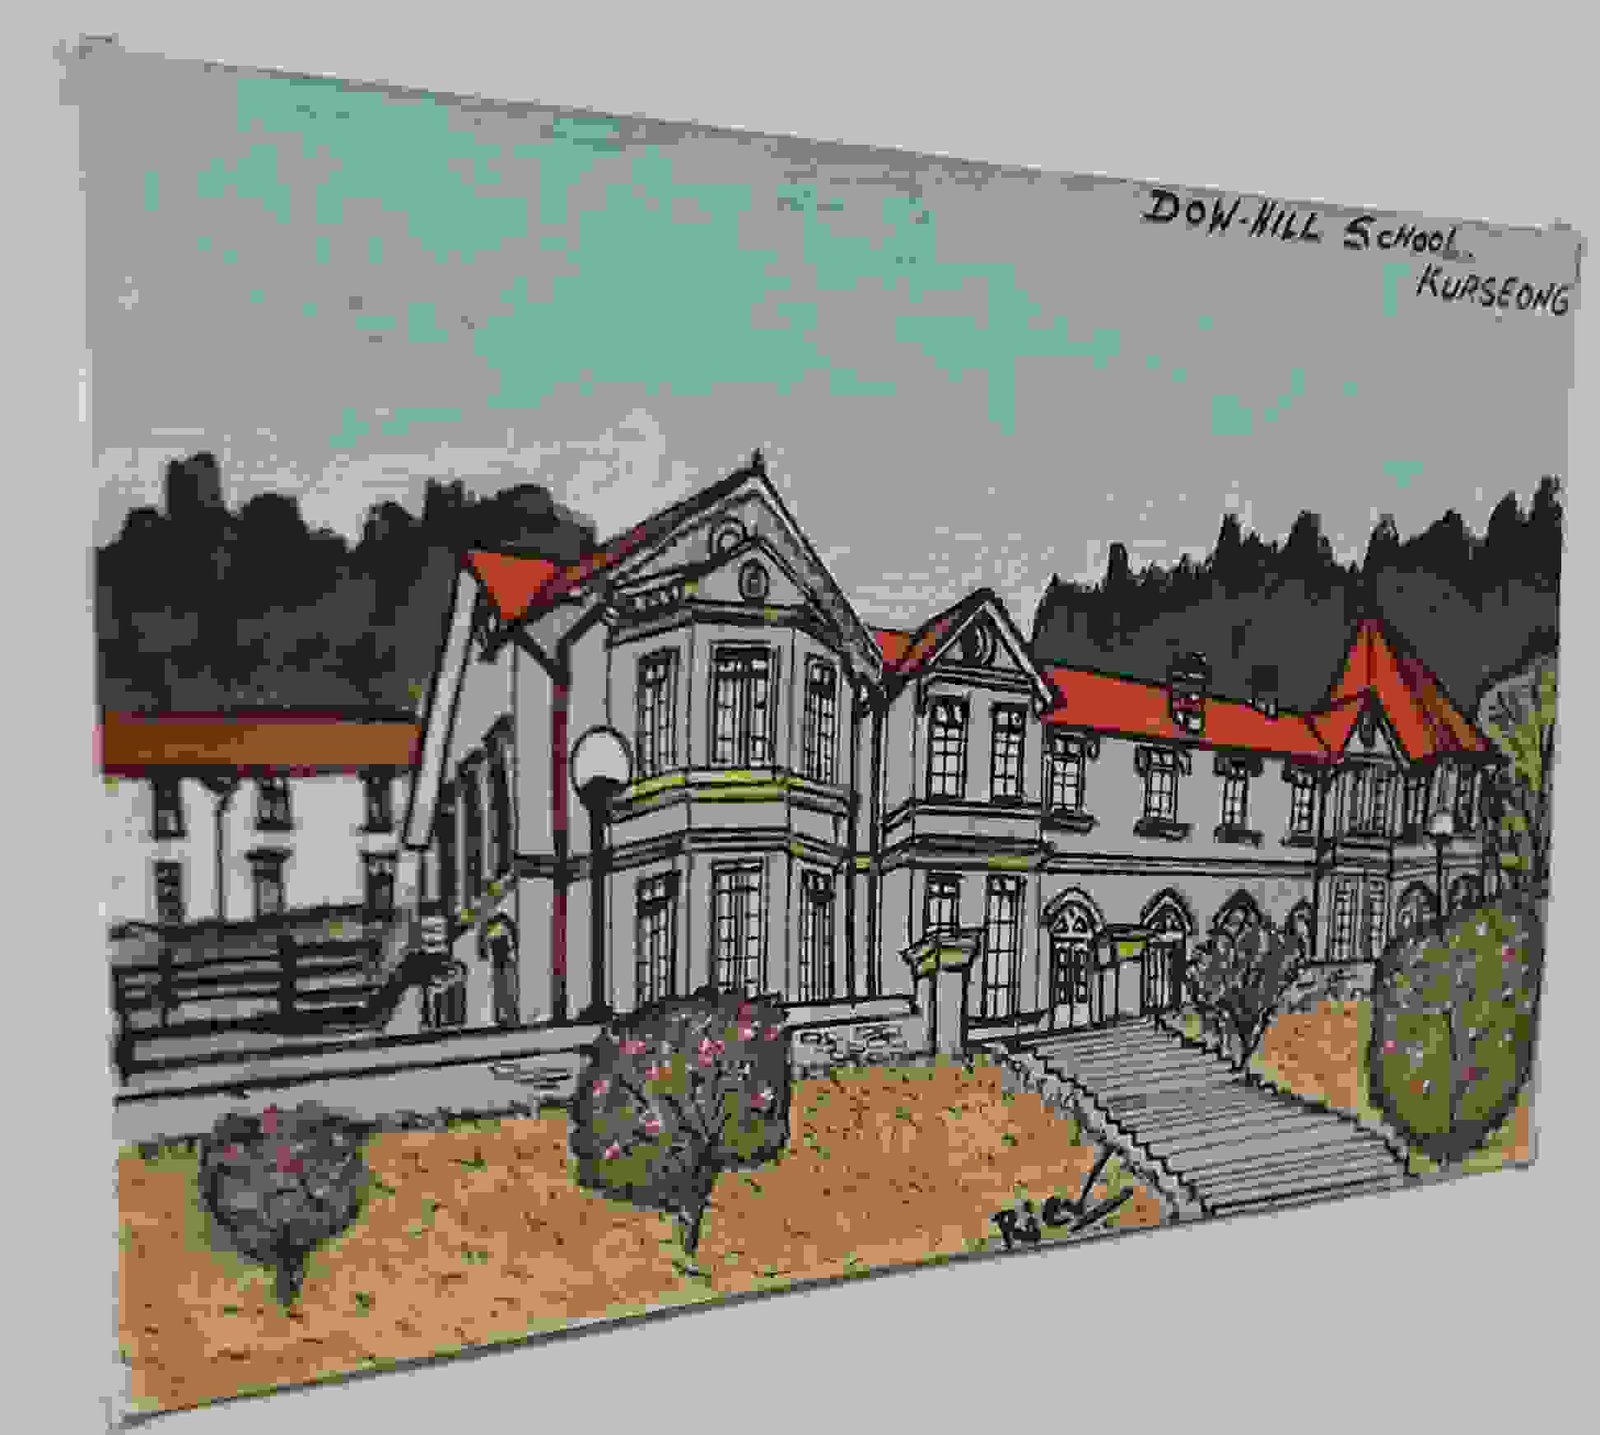 Painting Of The Dow Hill School Kurseong In Ink And